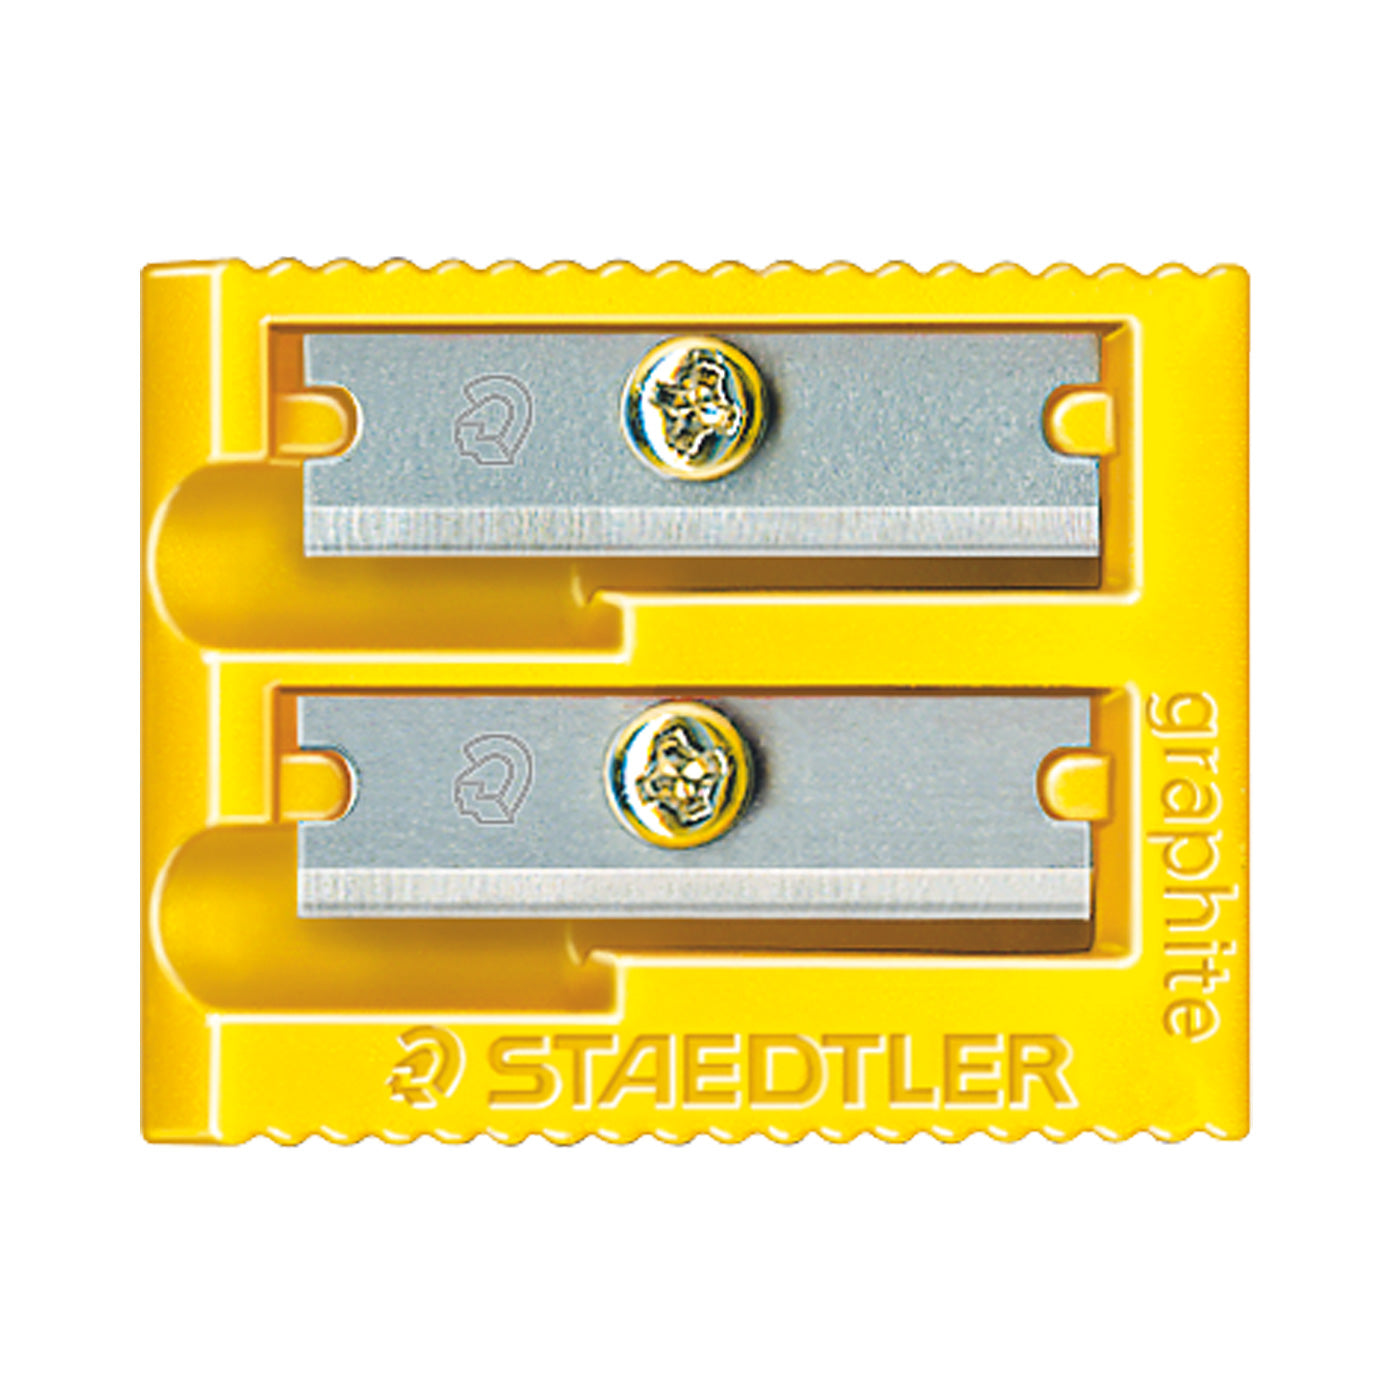 Staedtler Pencil Sharpener Plastic Double Hole - Yellow